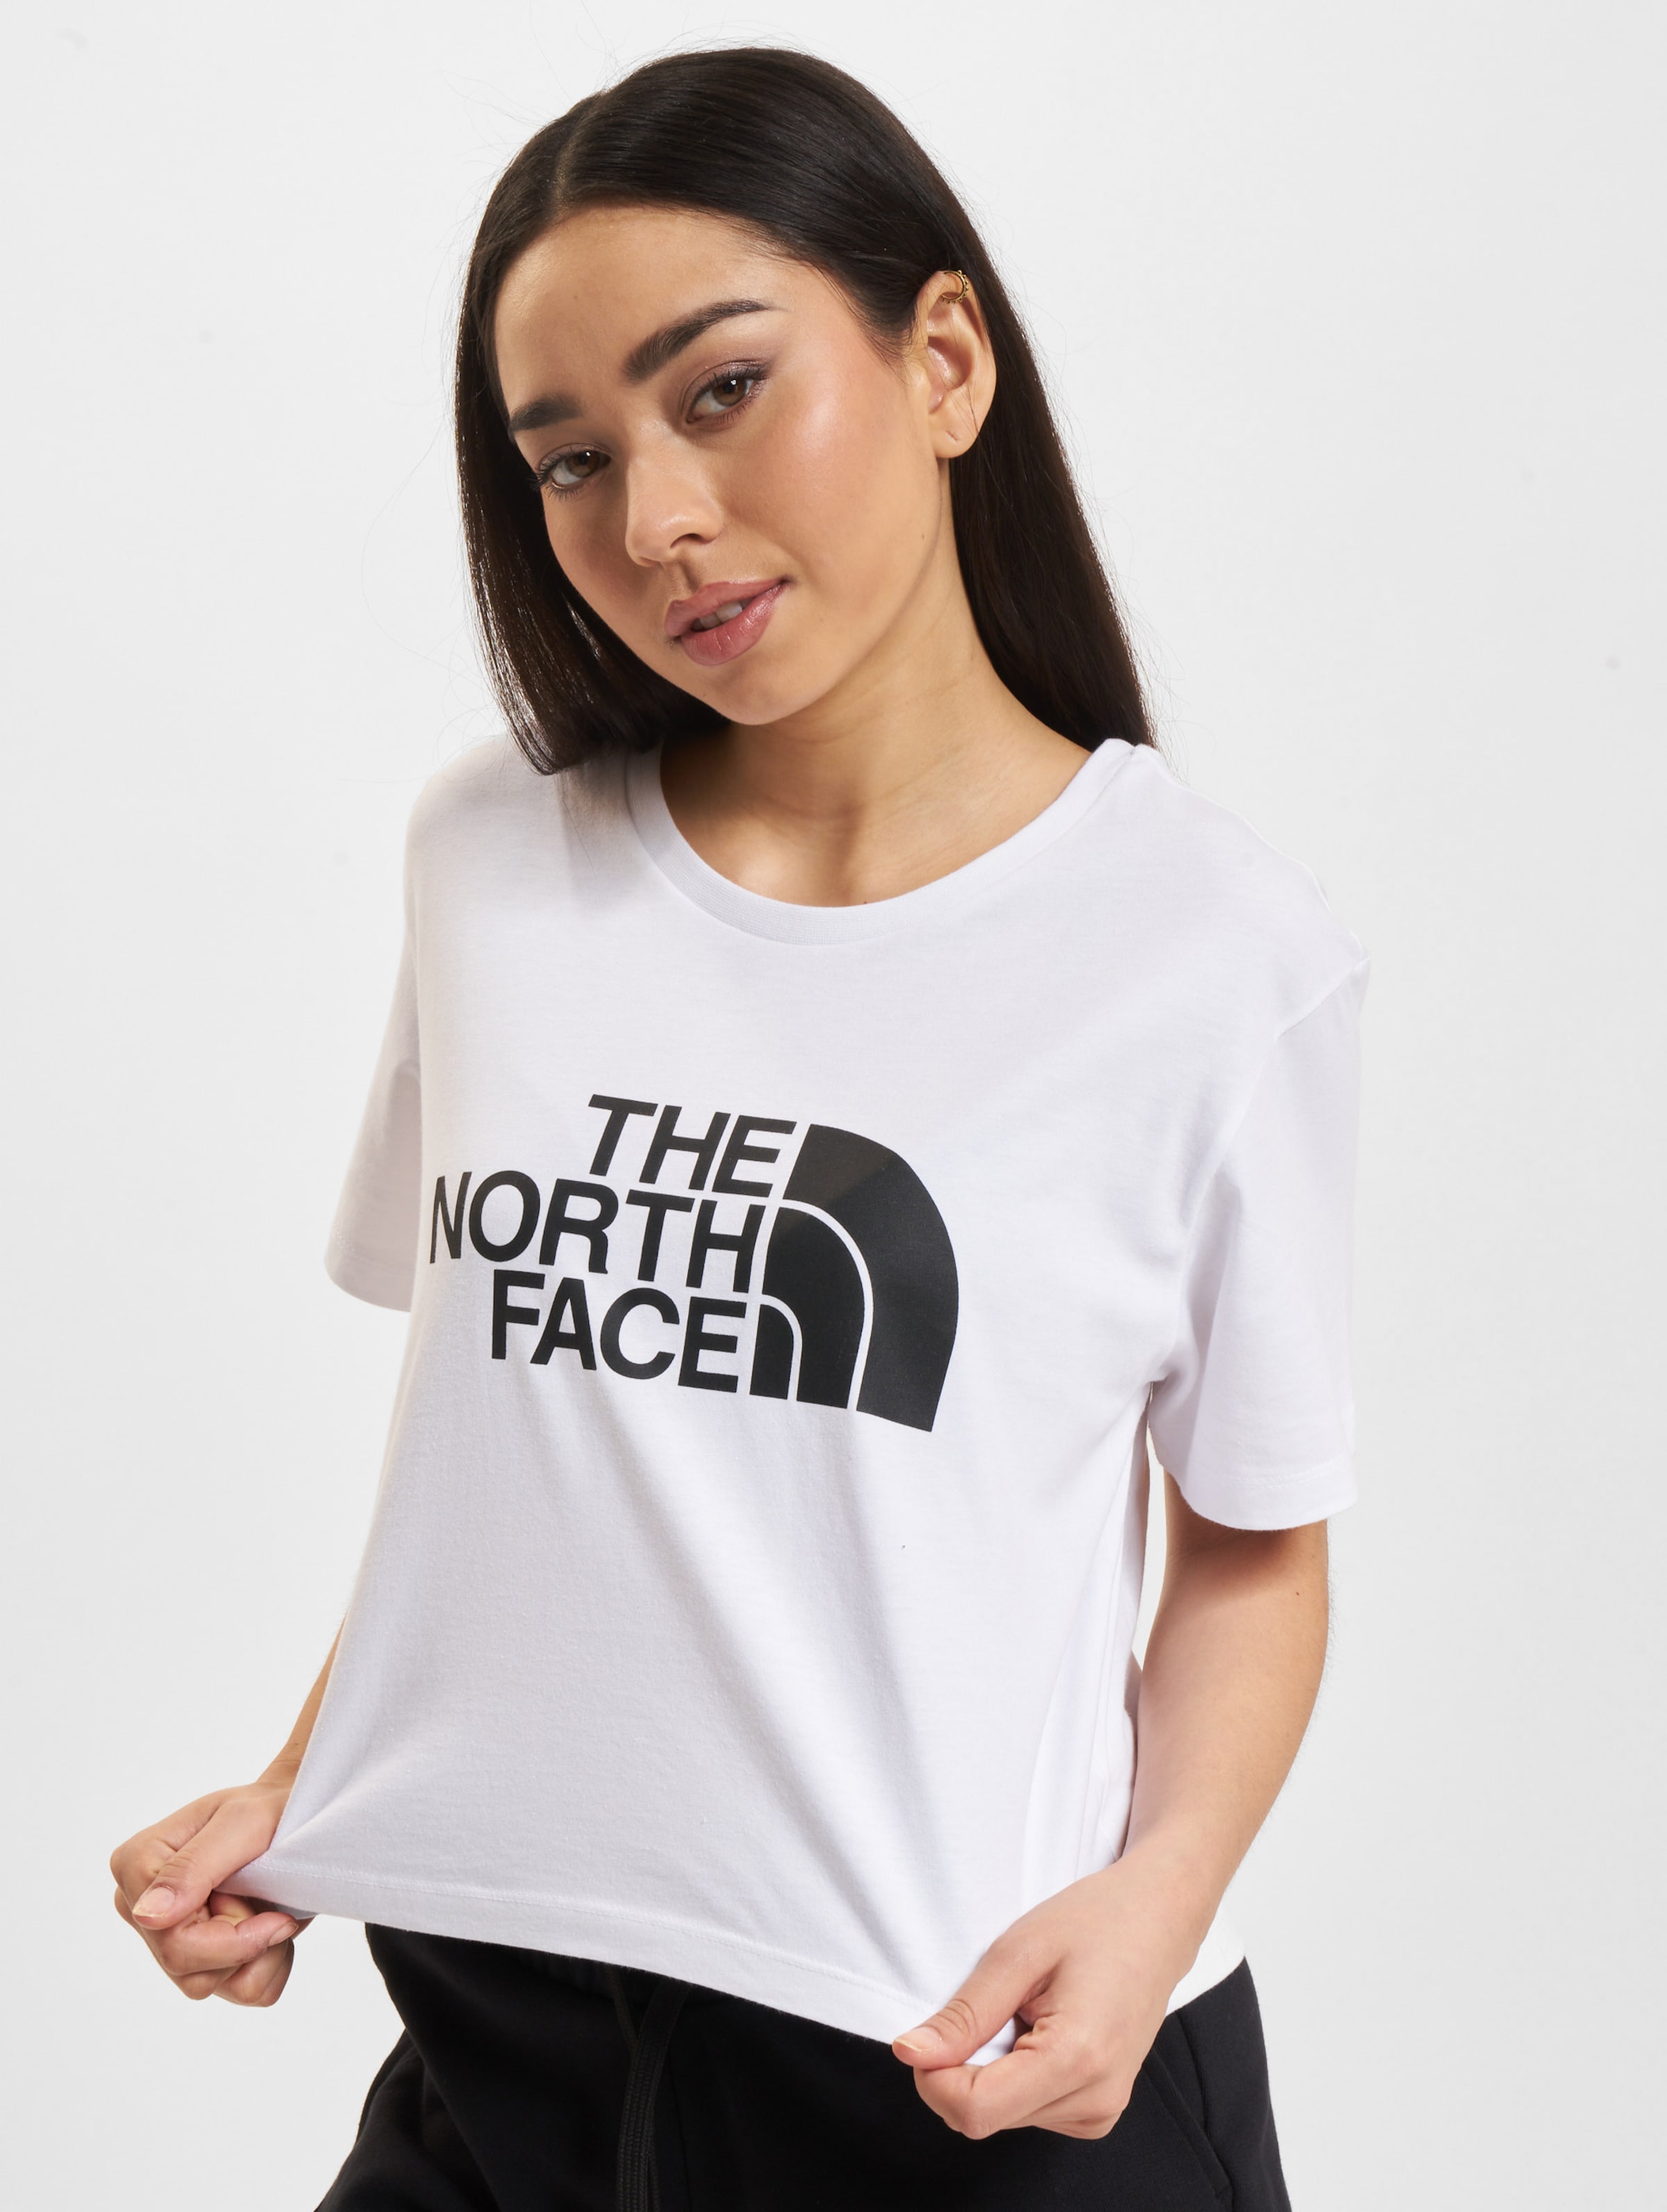 The North Face Cropped Easy T-Shirts Vrouwen op kleur wit, Maat L